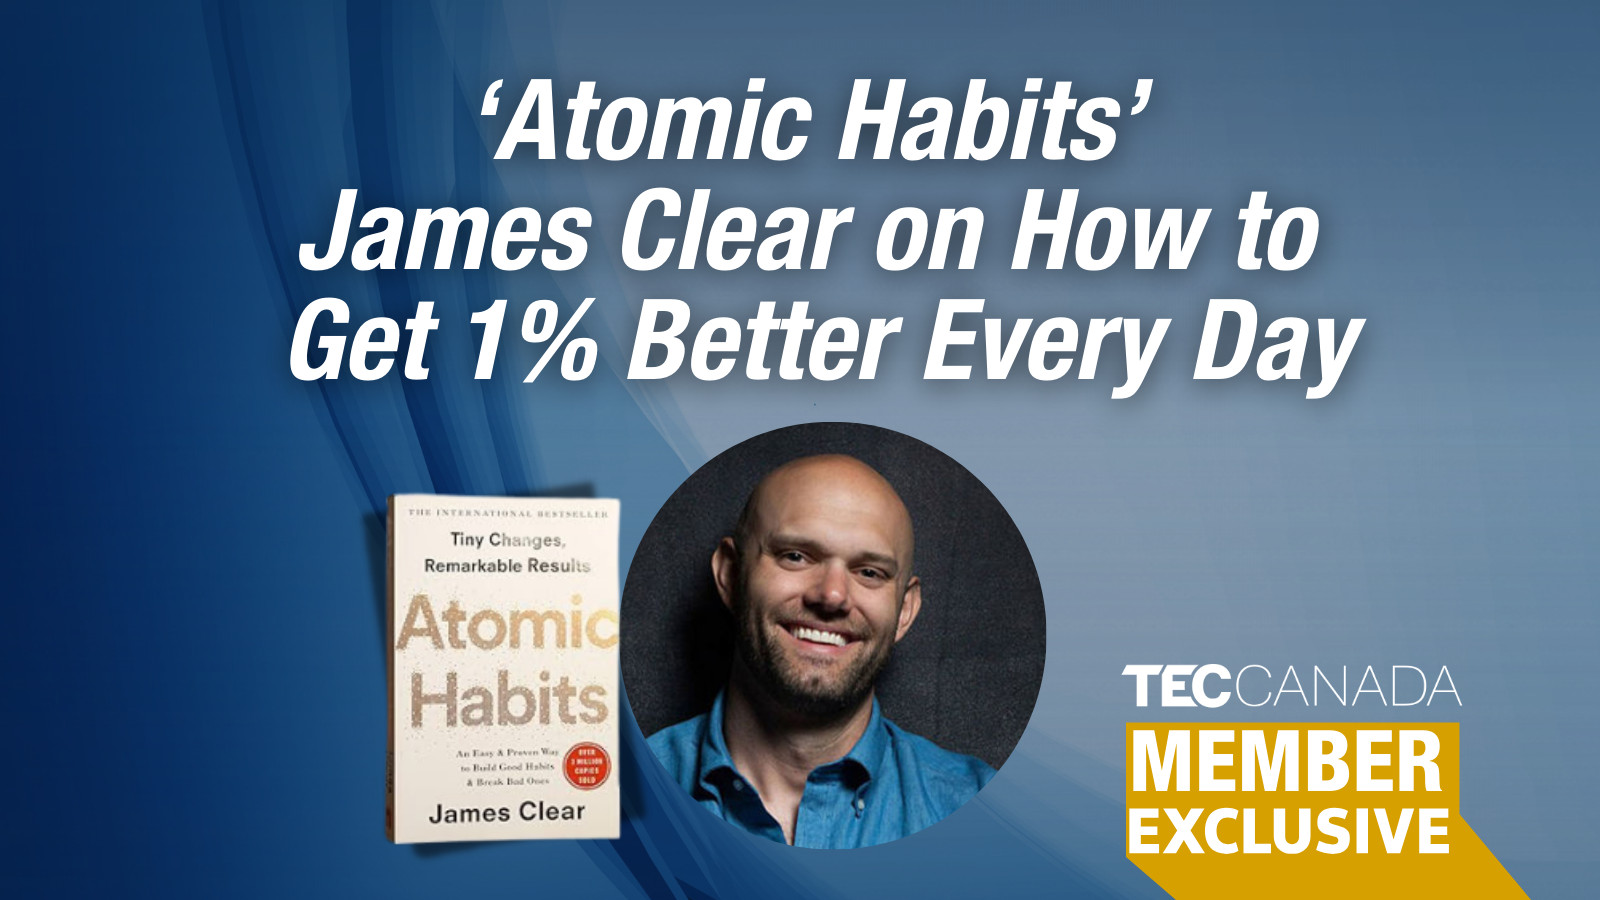 Known for his bestselling book “Atomic Habits,” James Clear will share the science of small habits, how they work, and how their effects compound and multiply over time in this exclusive discussion for TEC Canada and Vistage Worldwide, Inc. members! Through his research and personal stories, you will come away with practical strategies you can immediately apply in your personal and professional life. 📅**Use your MyVistage login details to register: https://lnkd.in/gKEwcHQr